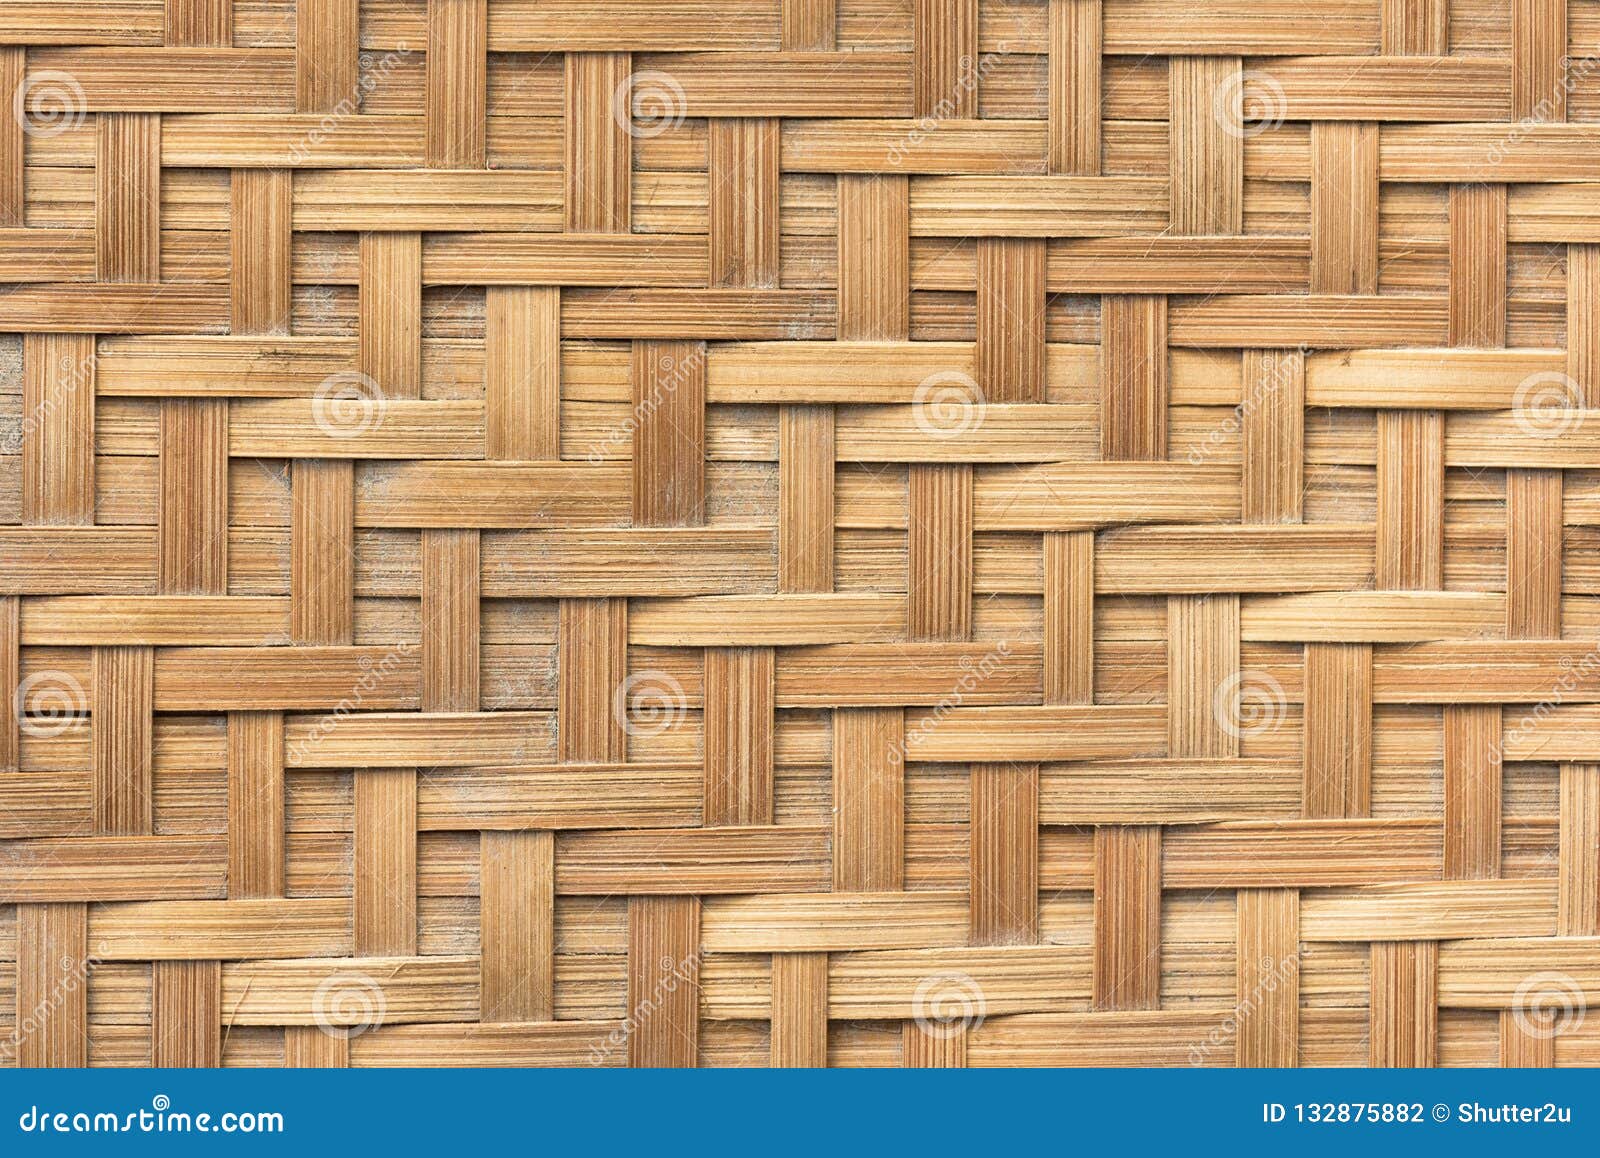 bamboo basket weave pattern texture background. background and